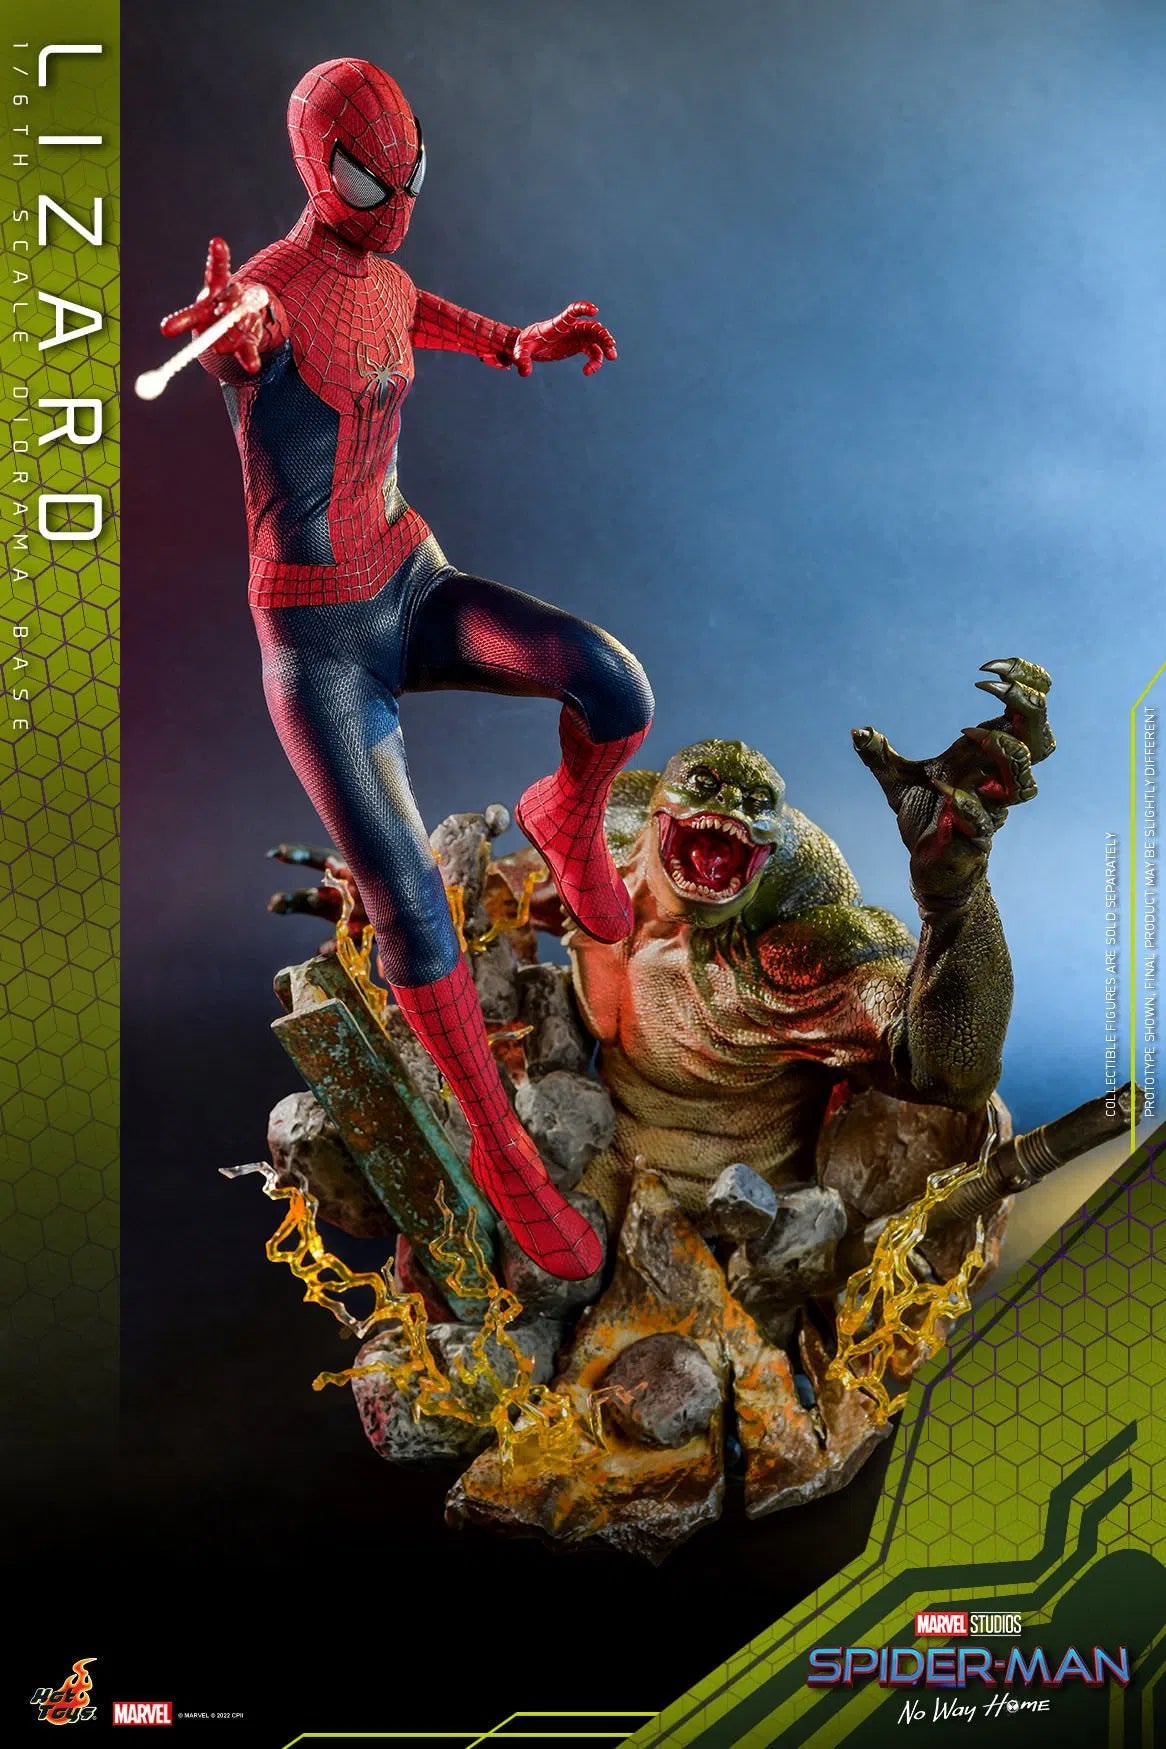 Spider-Man: With Lizard: The Amazing Spider-Man 2: Hot Toys